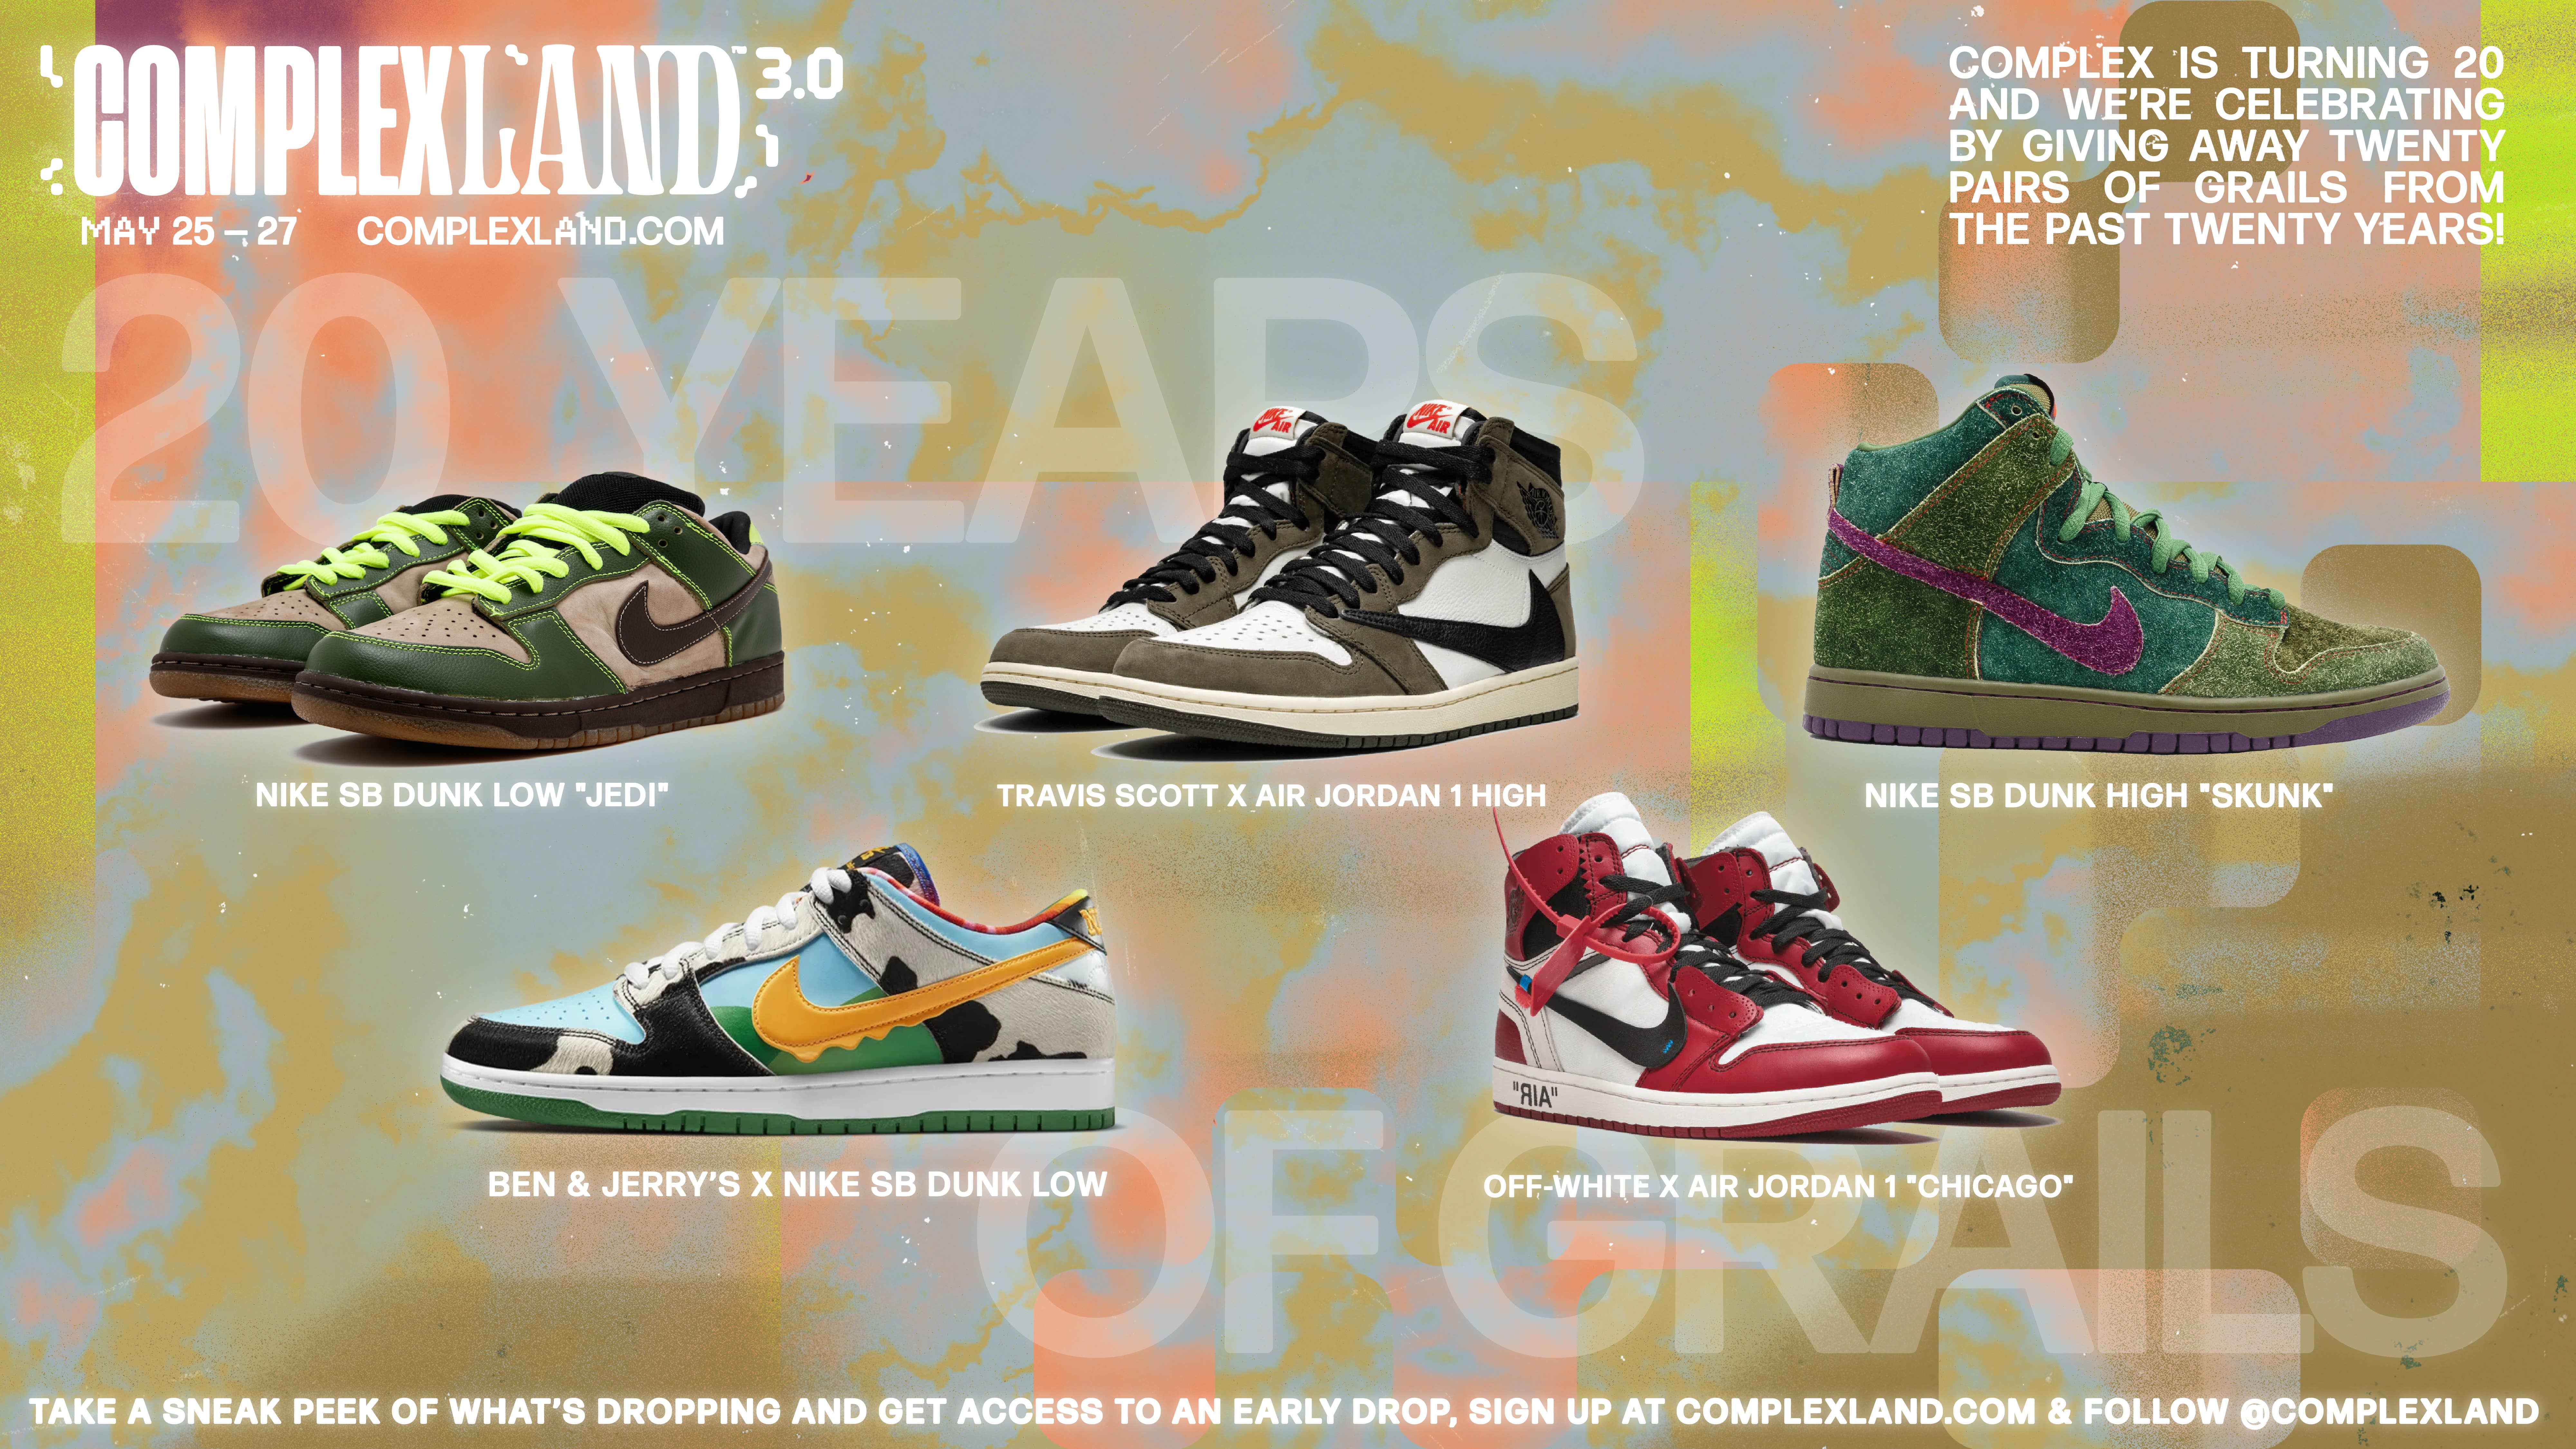 Complexland 3.0 20-Year Sneaker Giveaway